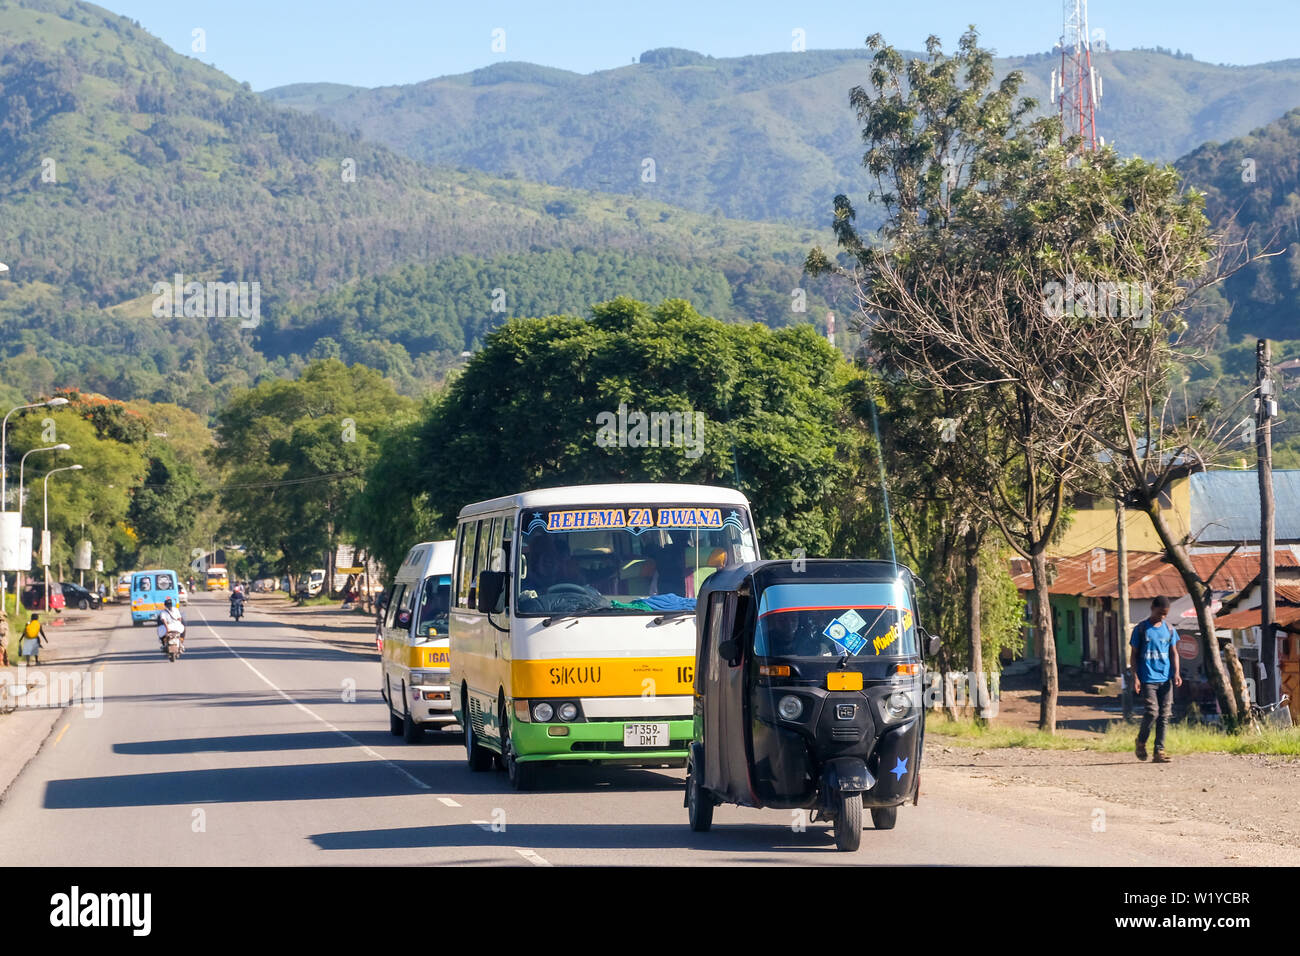 Tricycle taxi and bus in the streets of Mbeya, Tanzania.   ---   Dreirad-Taxi und Bus in den Straßen von Mbeya, Tansania. Stock Photo